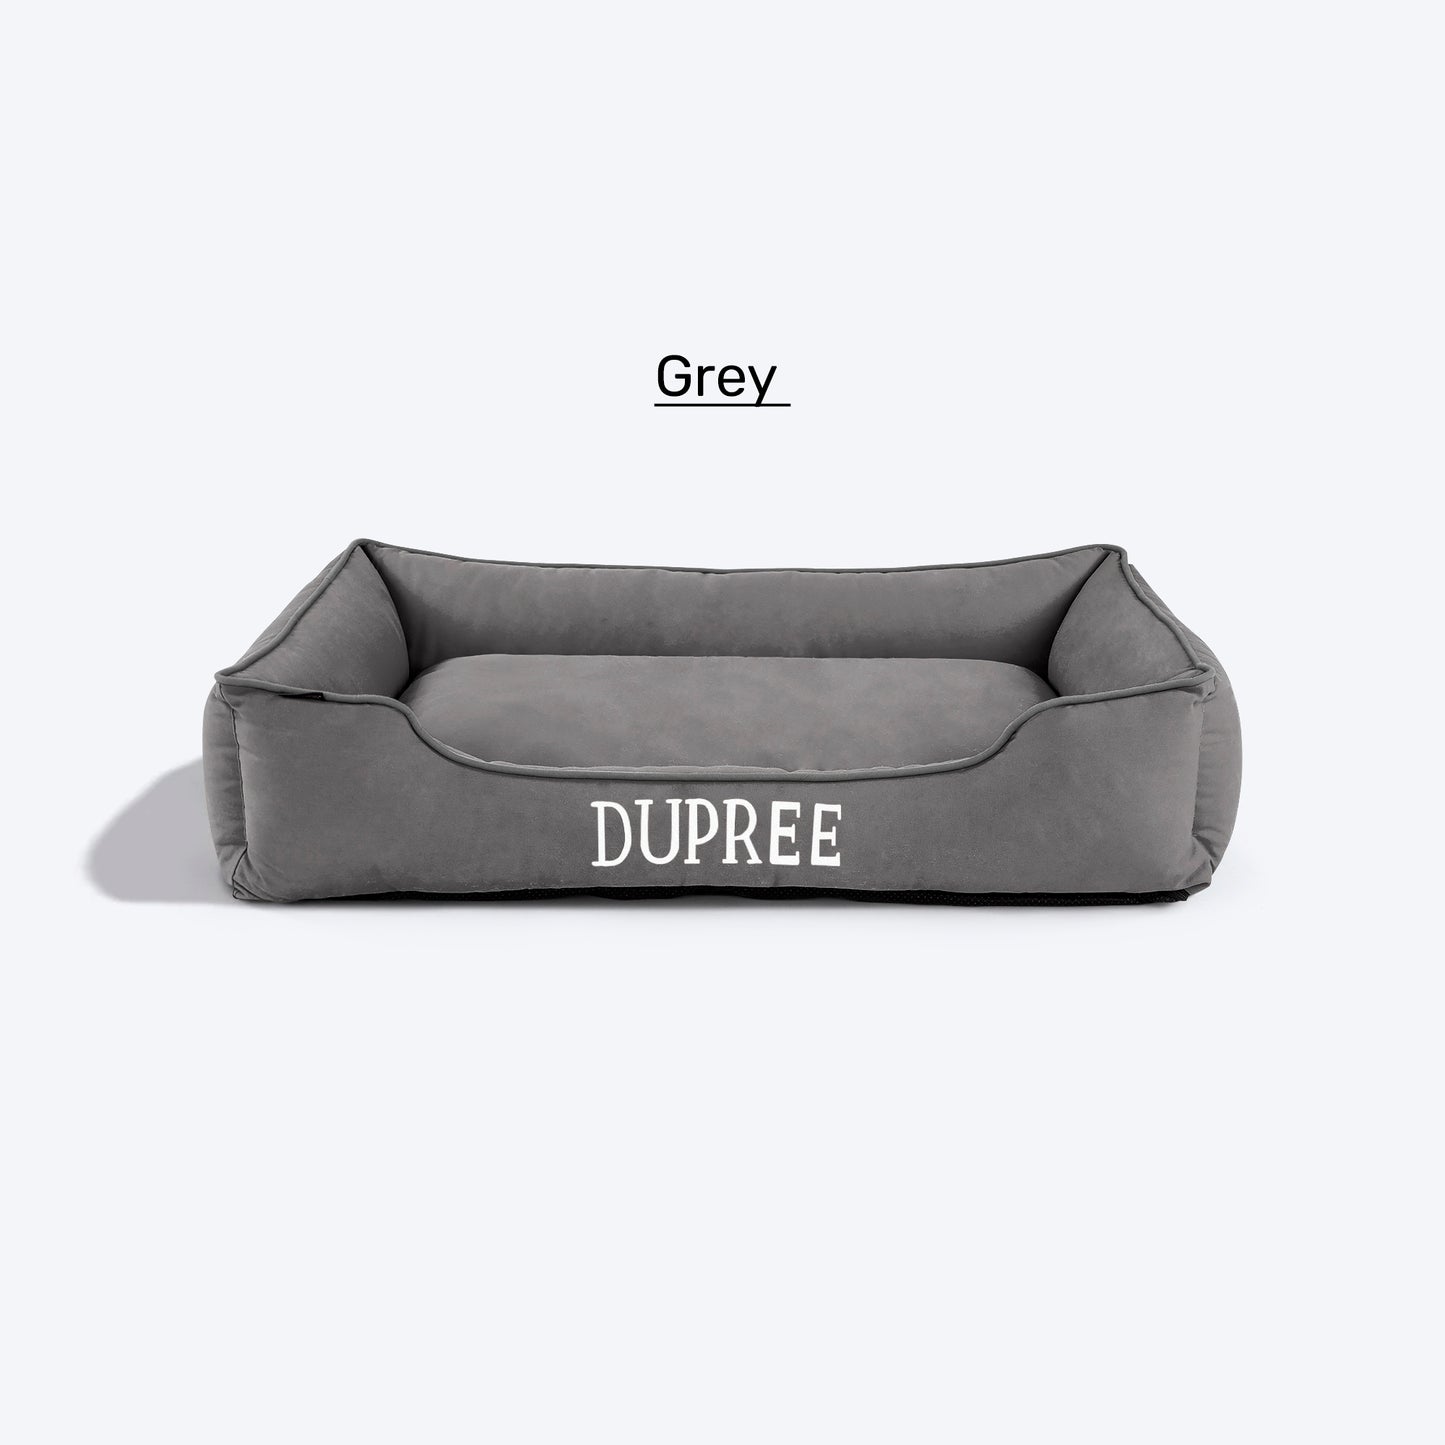 HUFT Personalised Lounger Dog Bed - Available in multiple colors (Free Cushion) - Heads Up For Tails